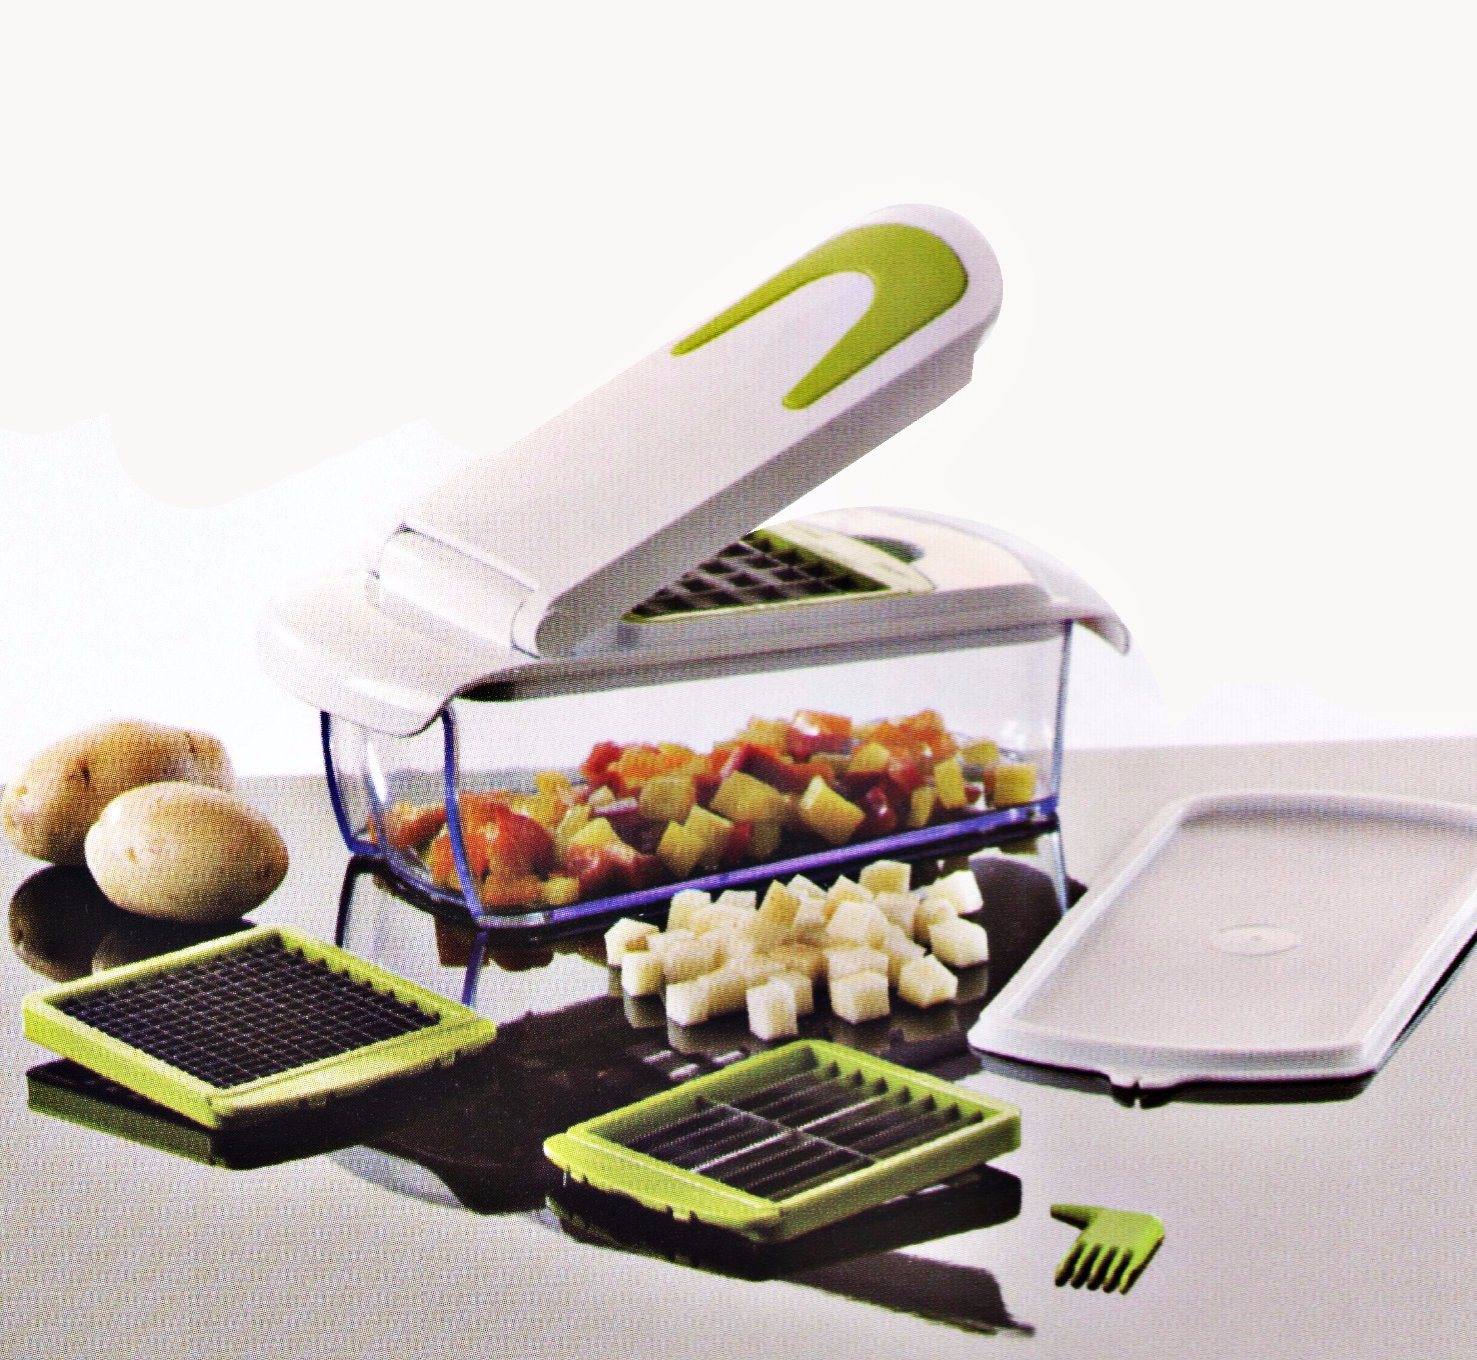 3 in 1 Plastic Vegetable Cutting Food Chopper Dice and Slice Machine Cg073